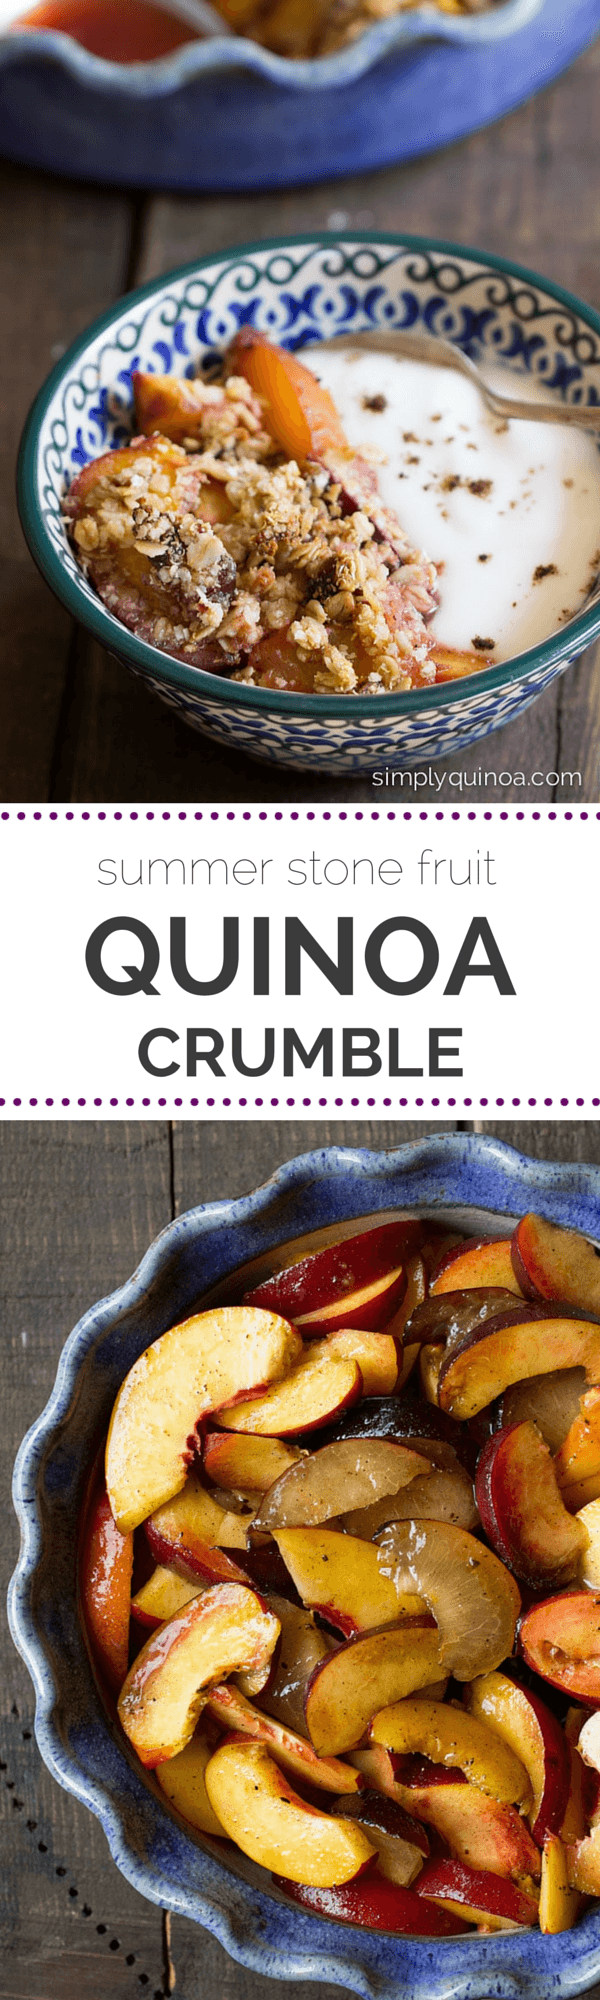 This AMAZING Stone Fruit Quinoa Crumble is made with only natural ingredients and is healthy enough to eat for breakfast | simplyquinoa.com